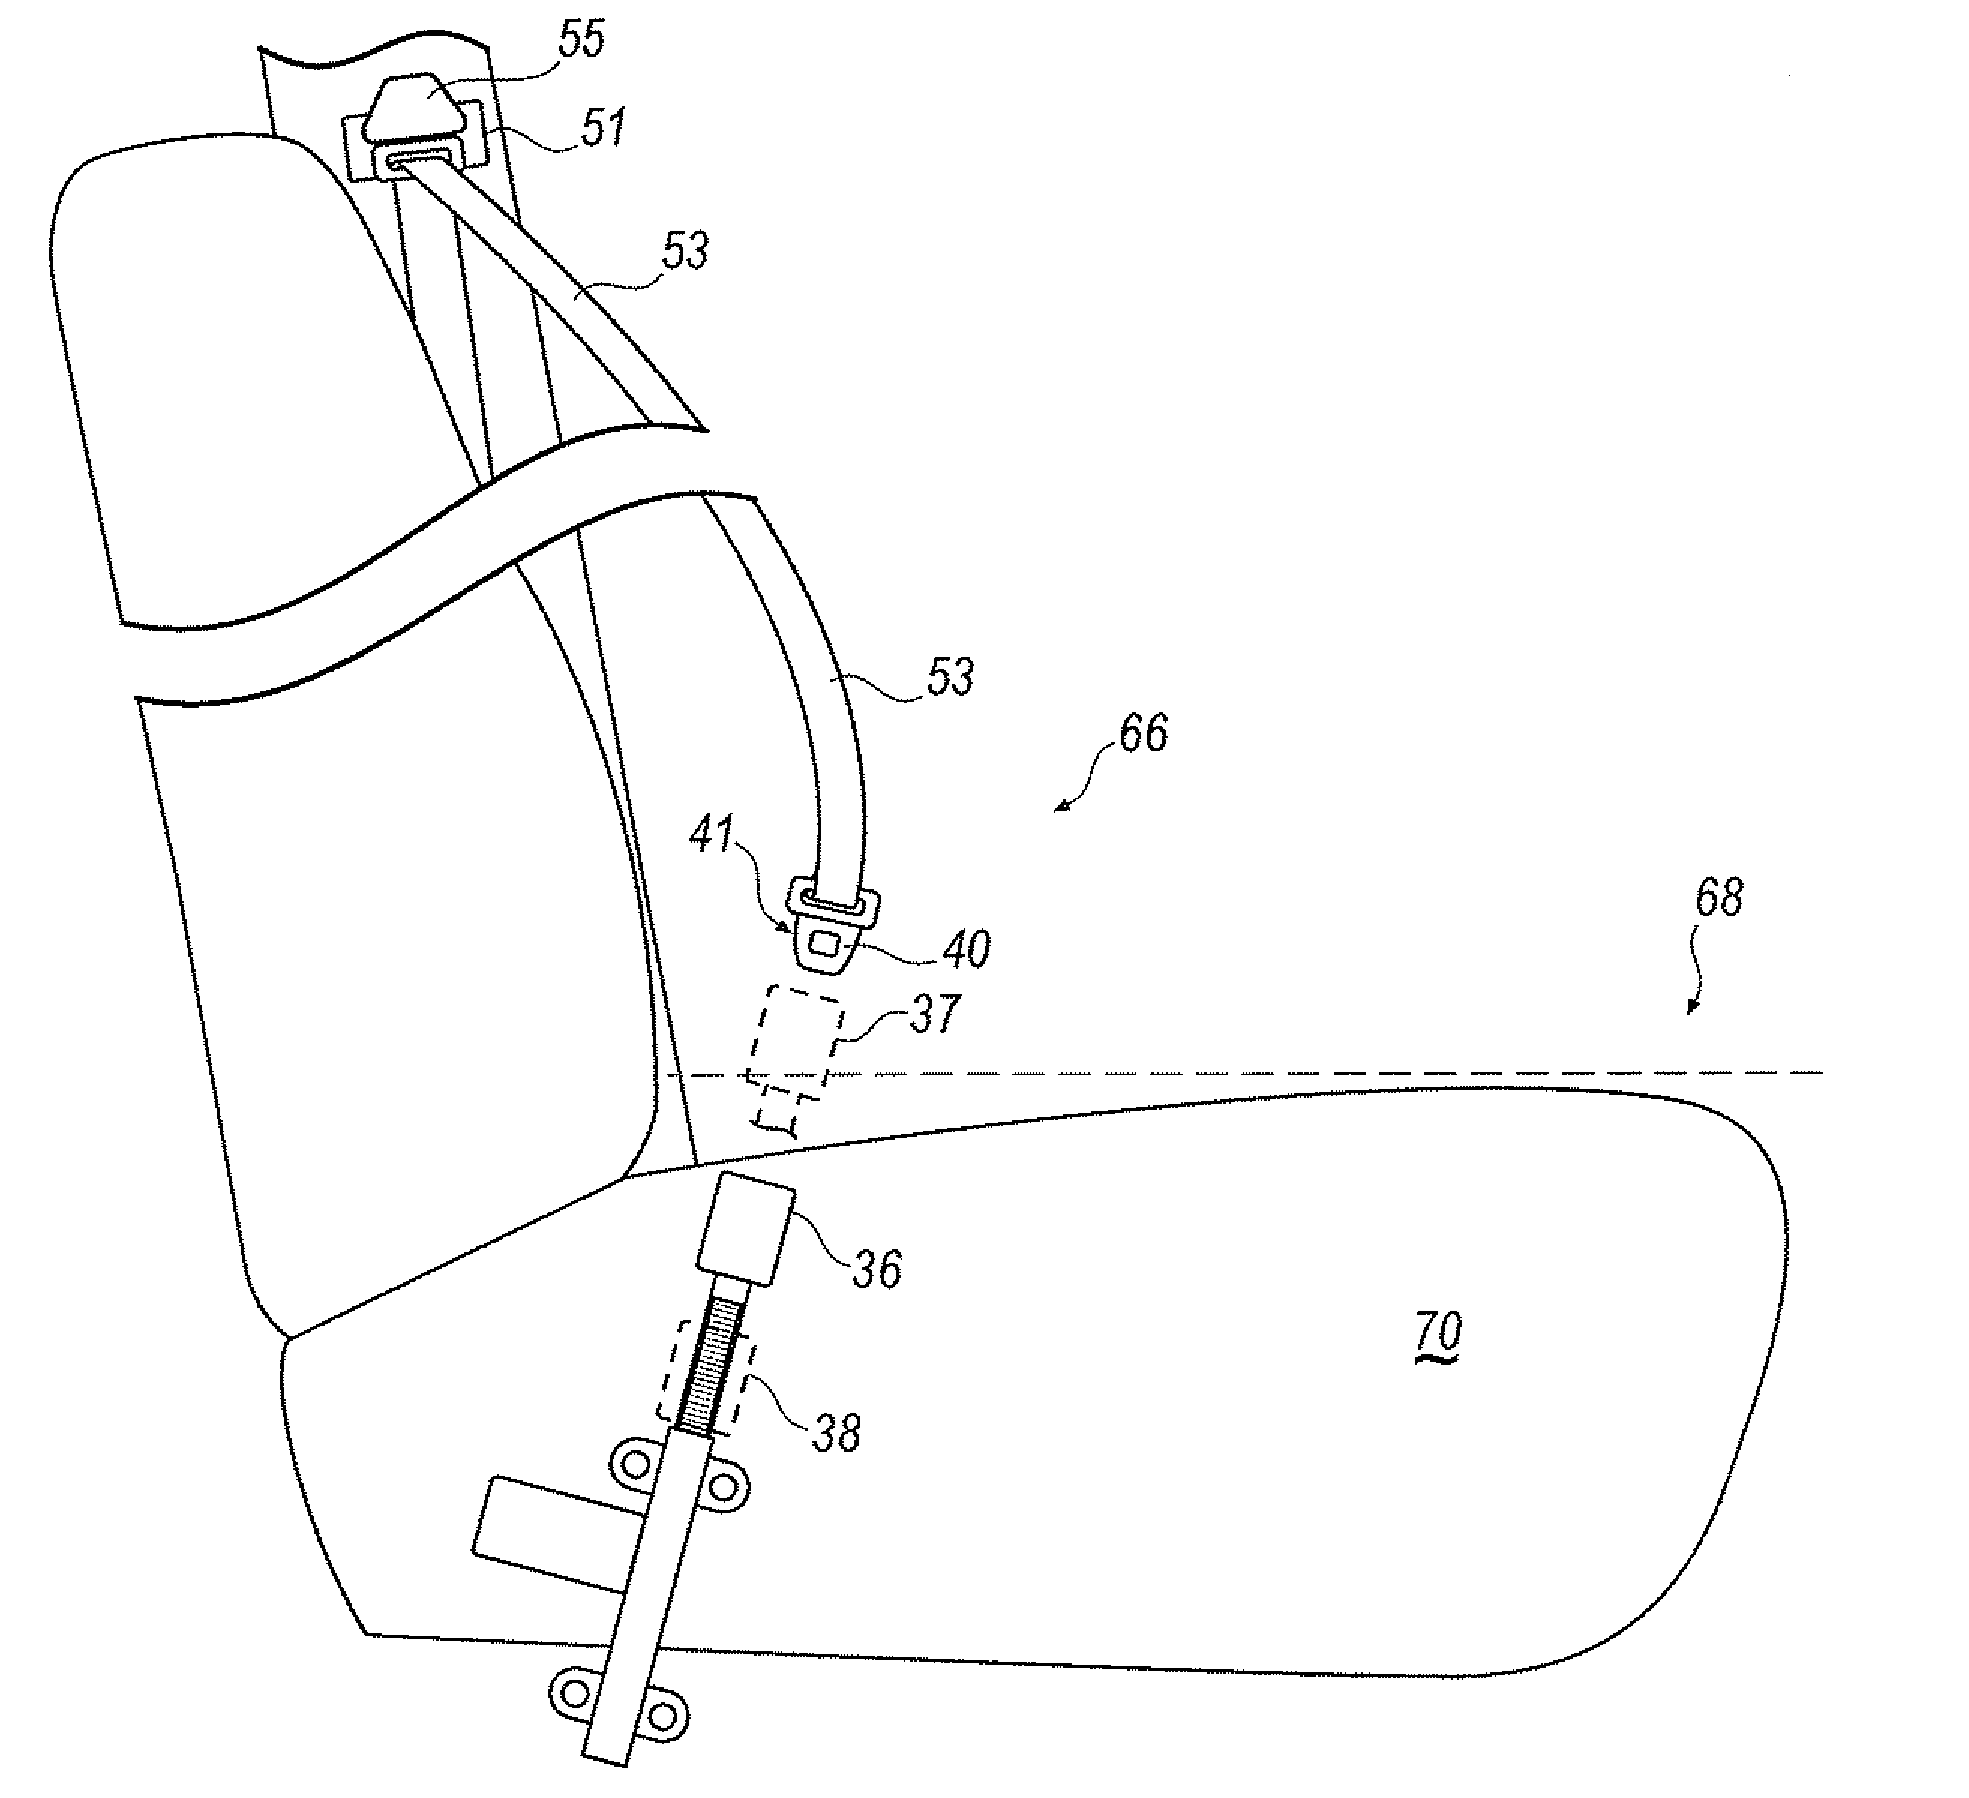 Re-settable vehicle seat belt buckle pre-tensioner presenter system and method of operation